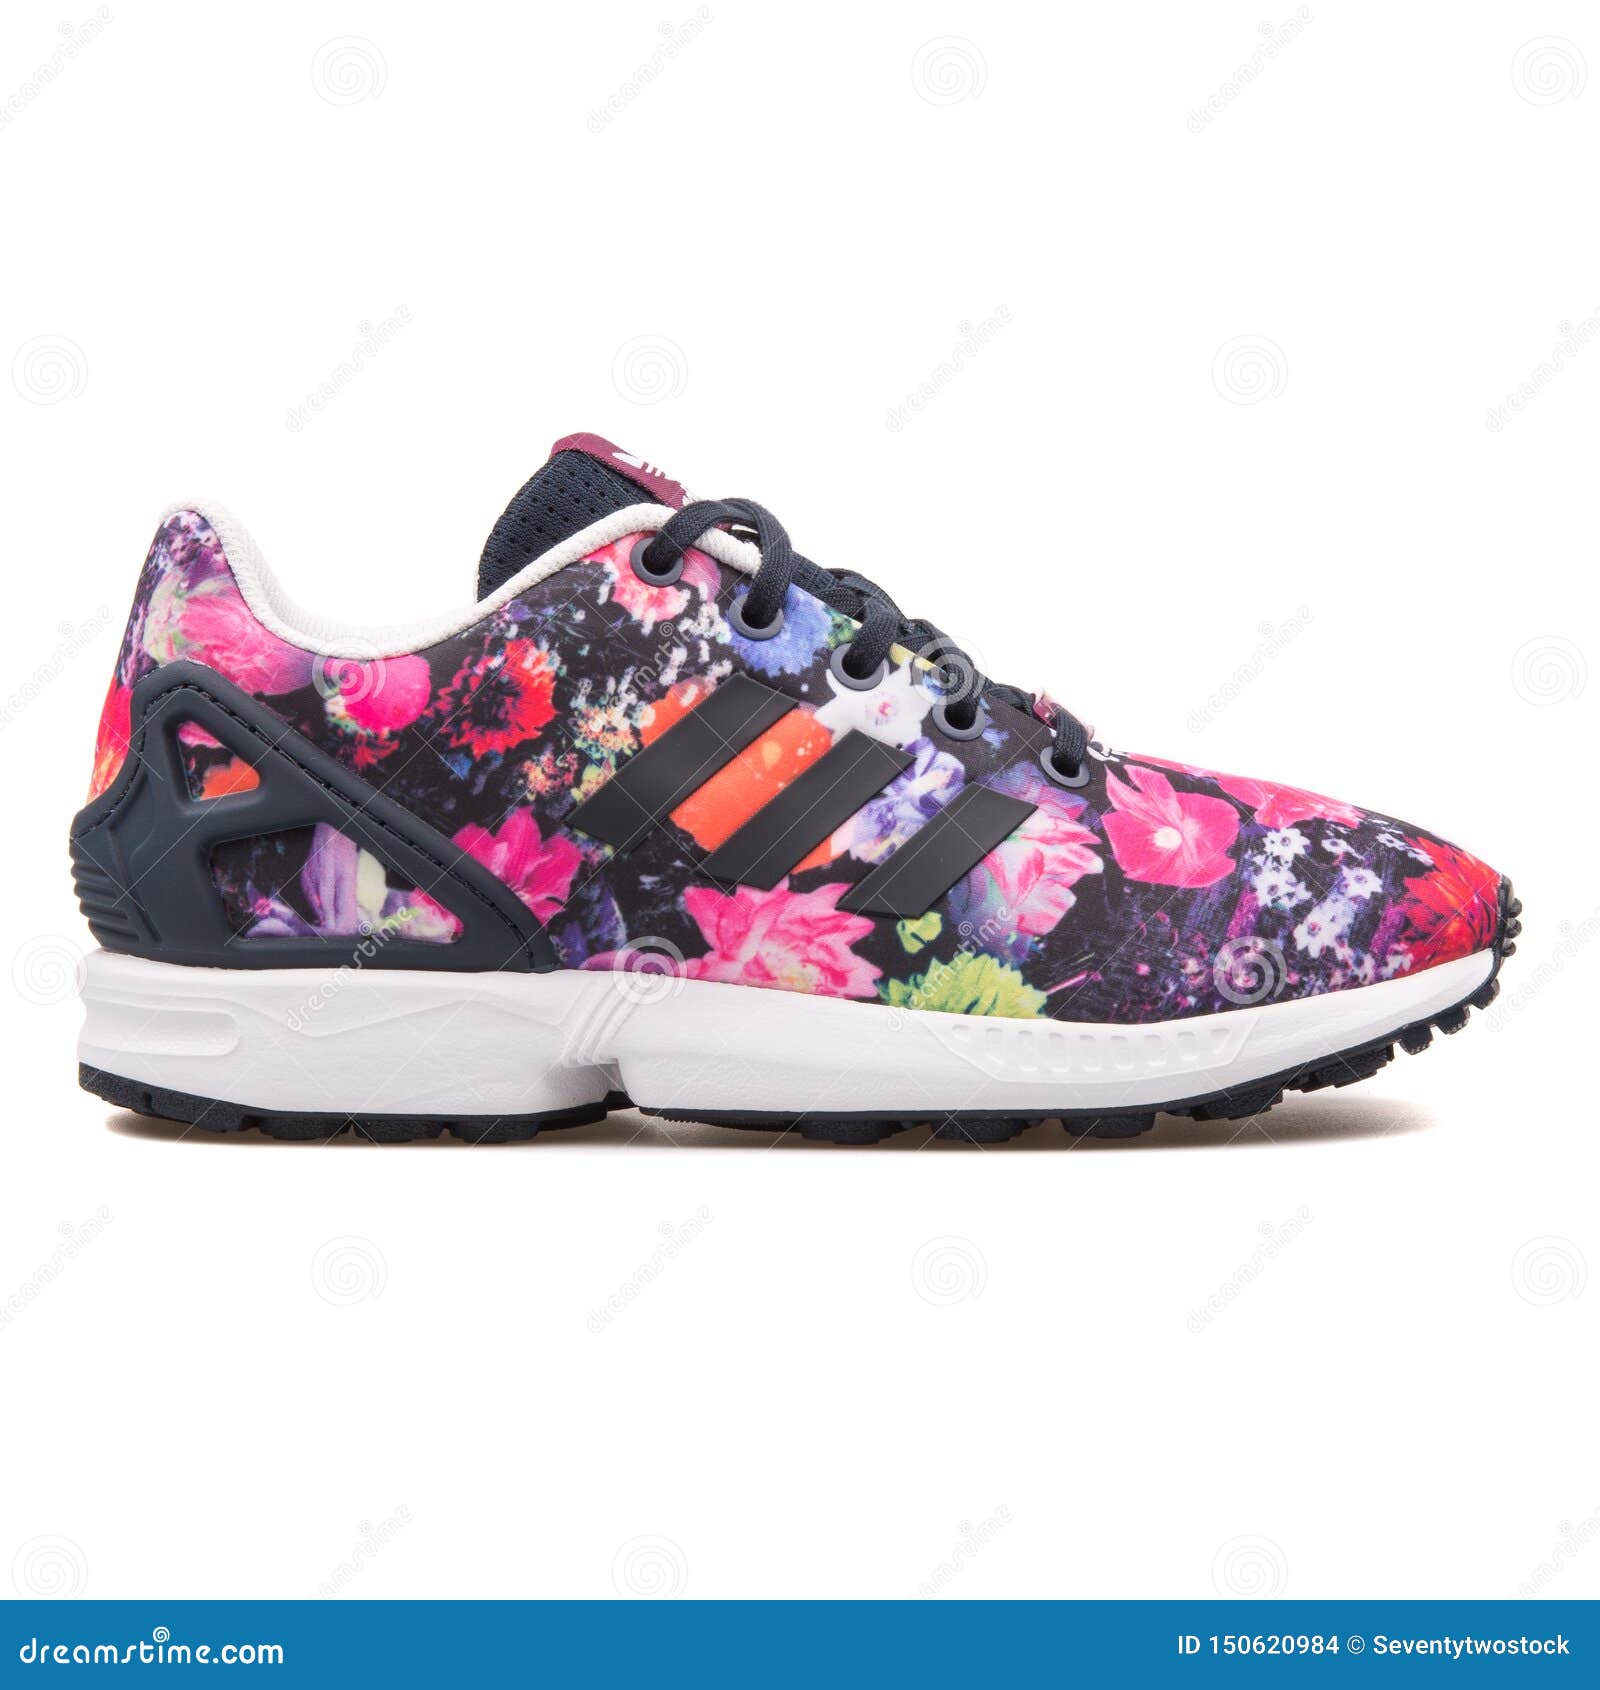 Adidas ZX Flux Black and Multi Color Print Sneaker Editorial Stock Image - Image of leather, casual: 150620984